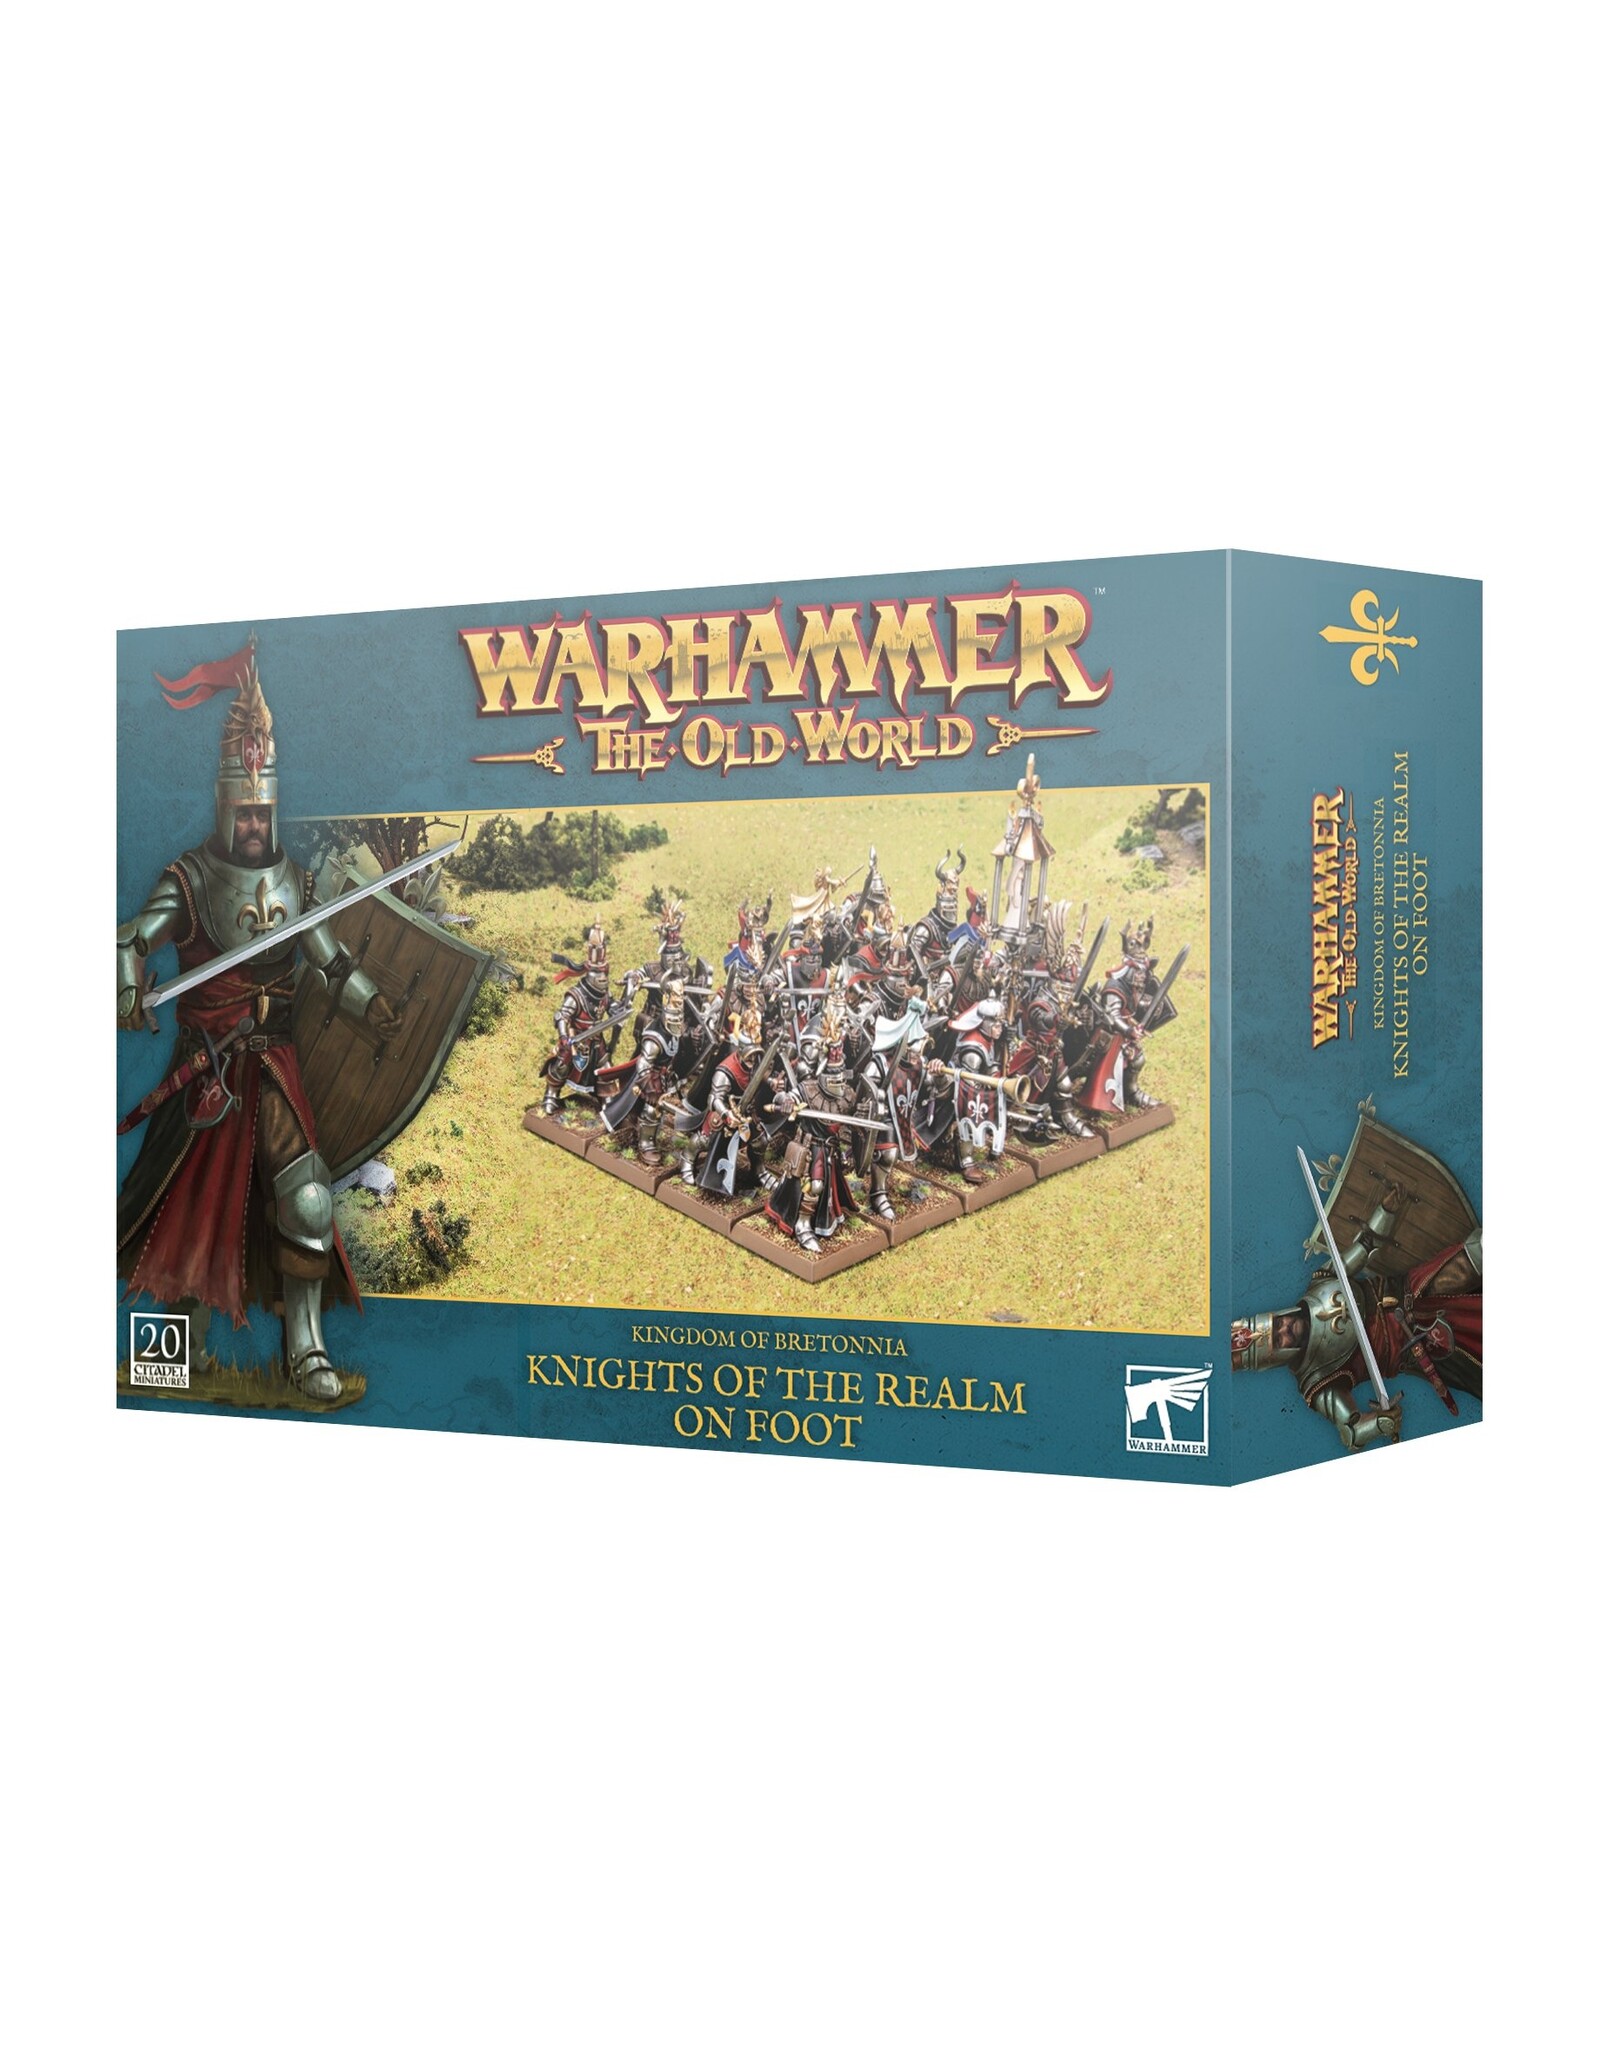 Warhammer Old World Kingdom of Bretonnia: Knights of The Realm On Foot